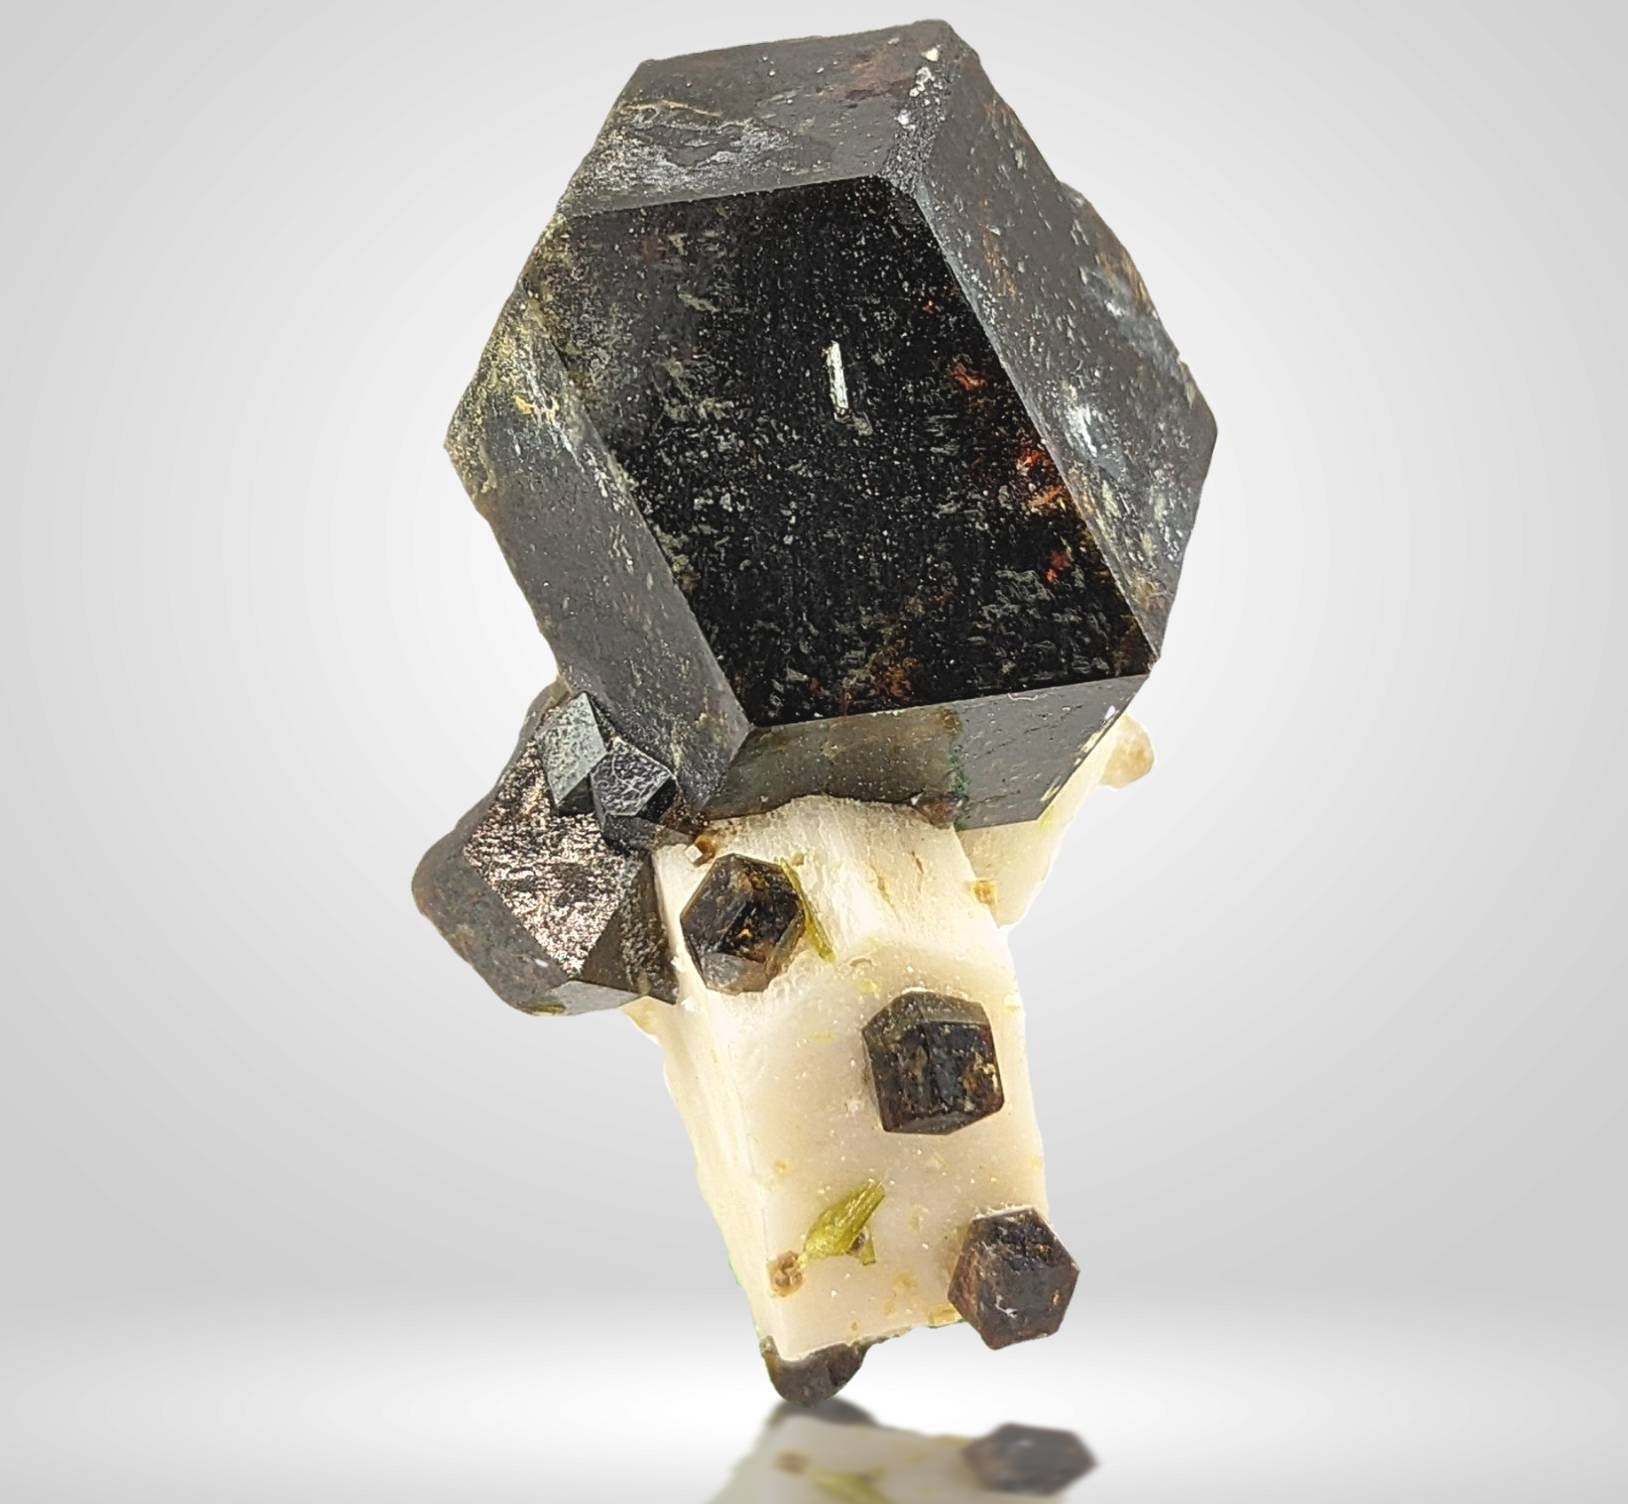 ARSAA GEMS AND MINERALSOn matrix andradite garnet with green epidote crystals from Pakistan, 7.5 grams - Premium  from ARSAA GEMS AND MINERALS - Just $30.00! Shop now at ARSAA GEMS AND MINERALS